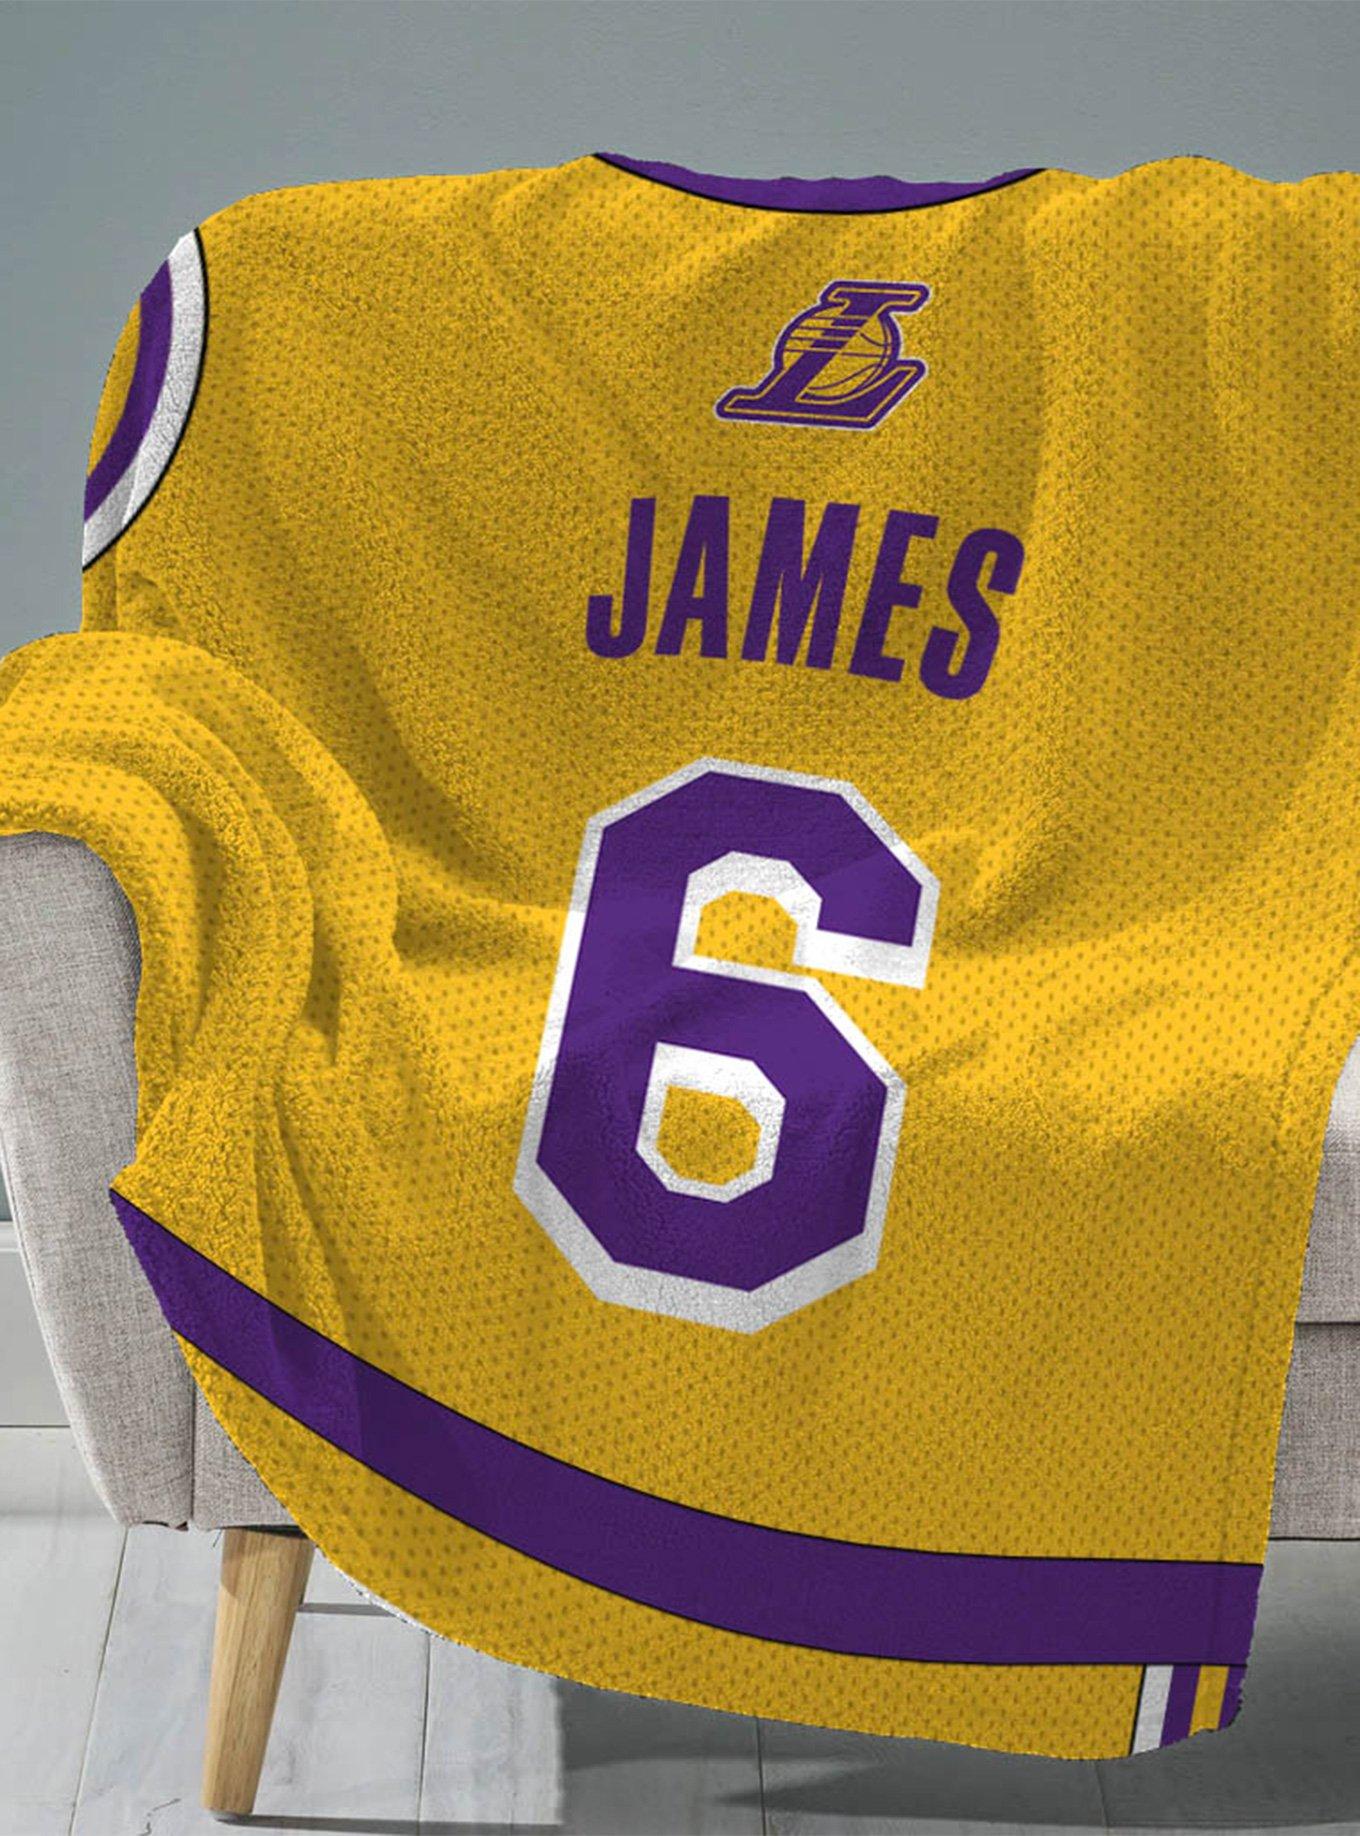 LeBron James Los Angeles Lakers Marvel Black Panther Stitched Basketball  Jersey